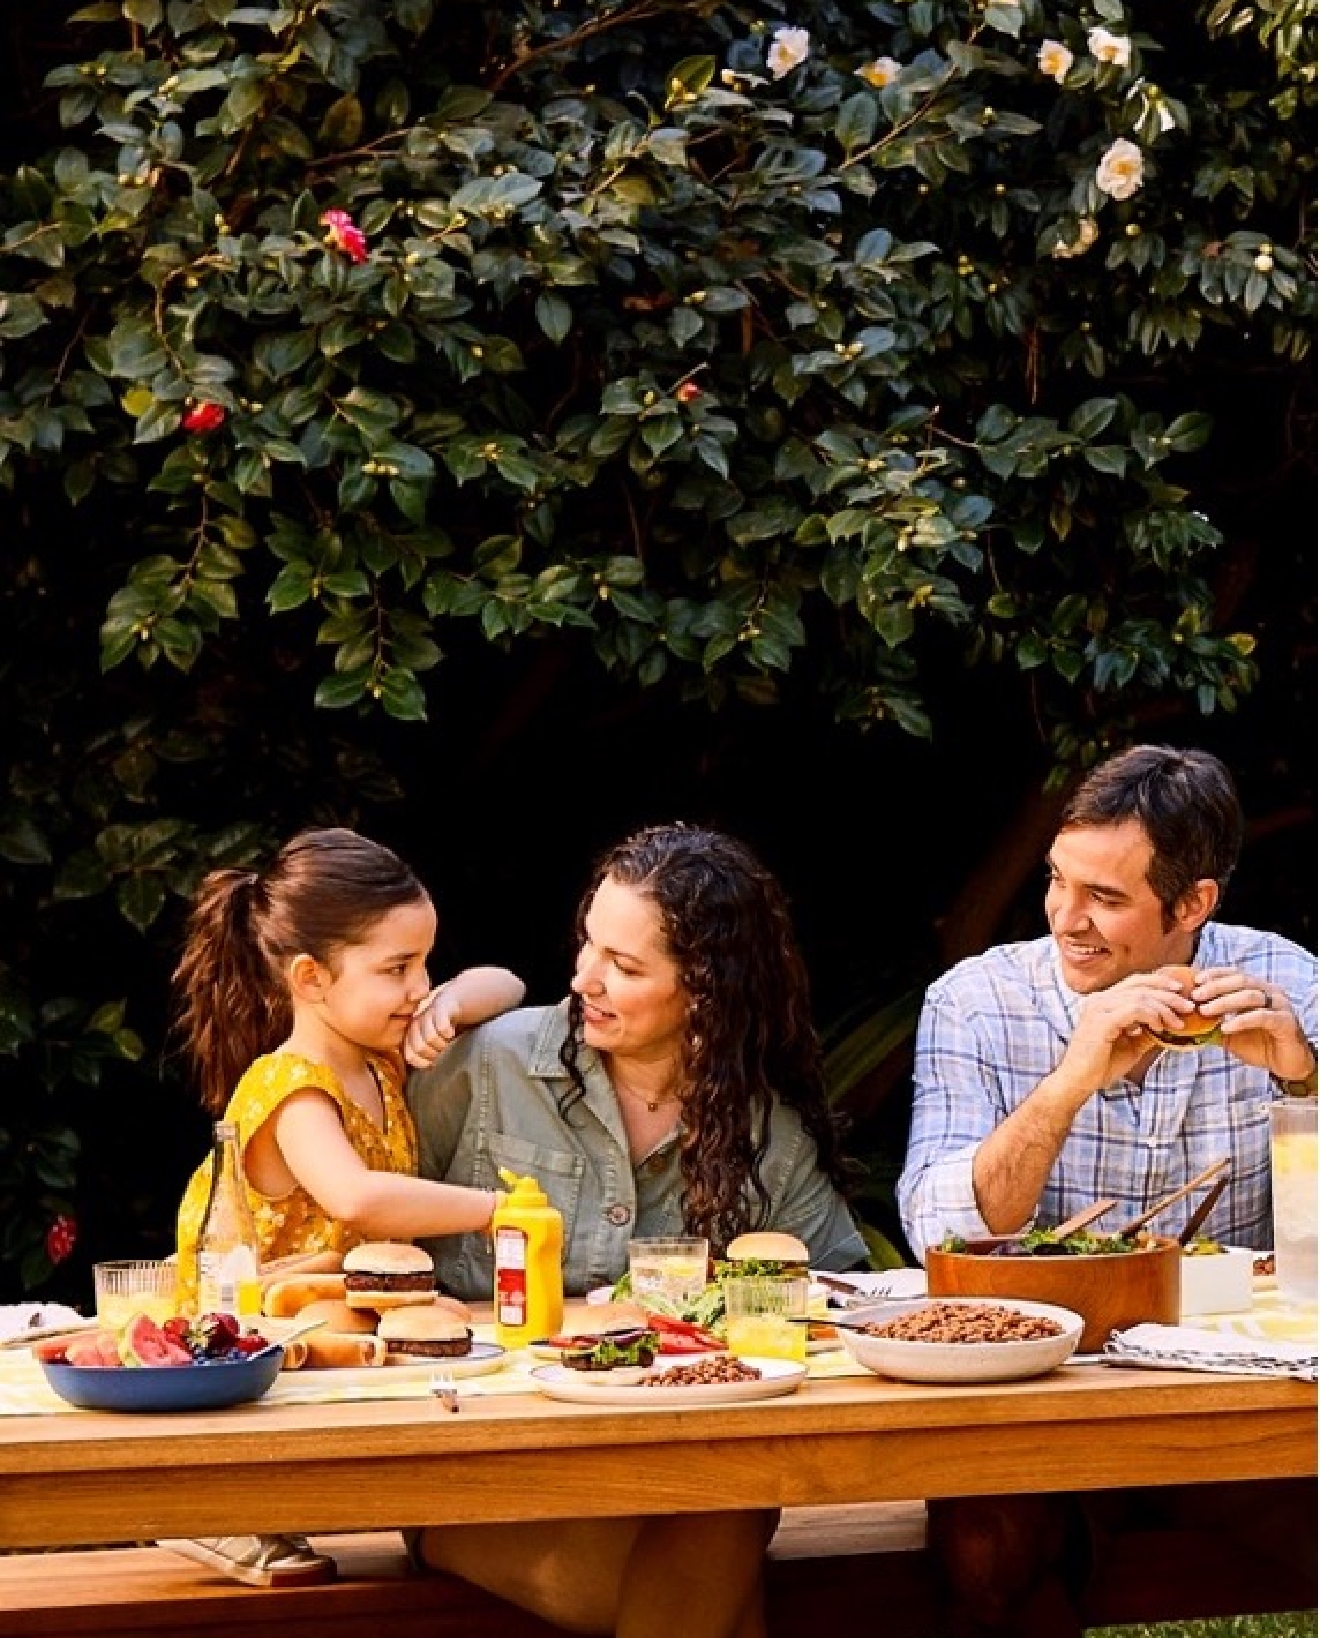 A family having a picnic at a picnic table near the woods.